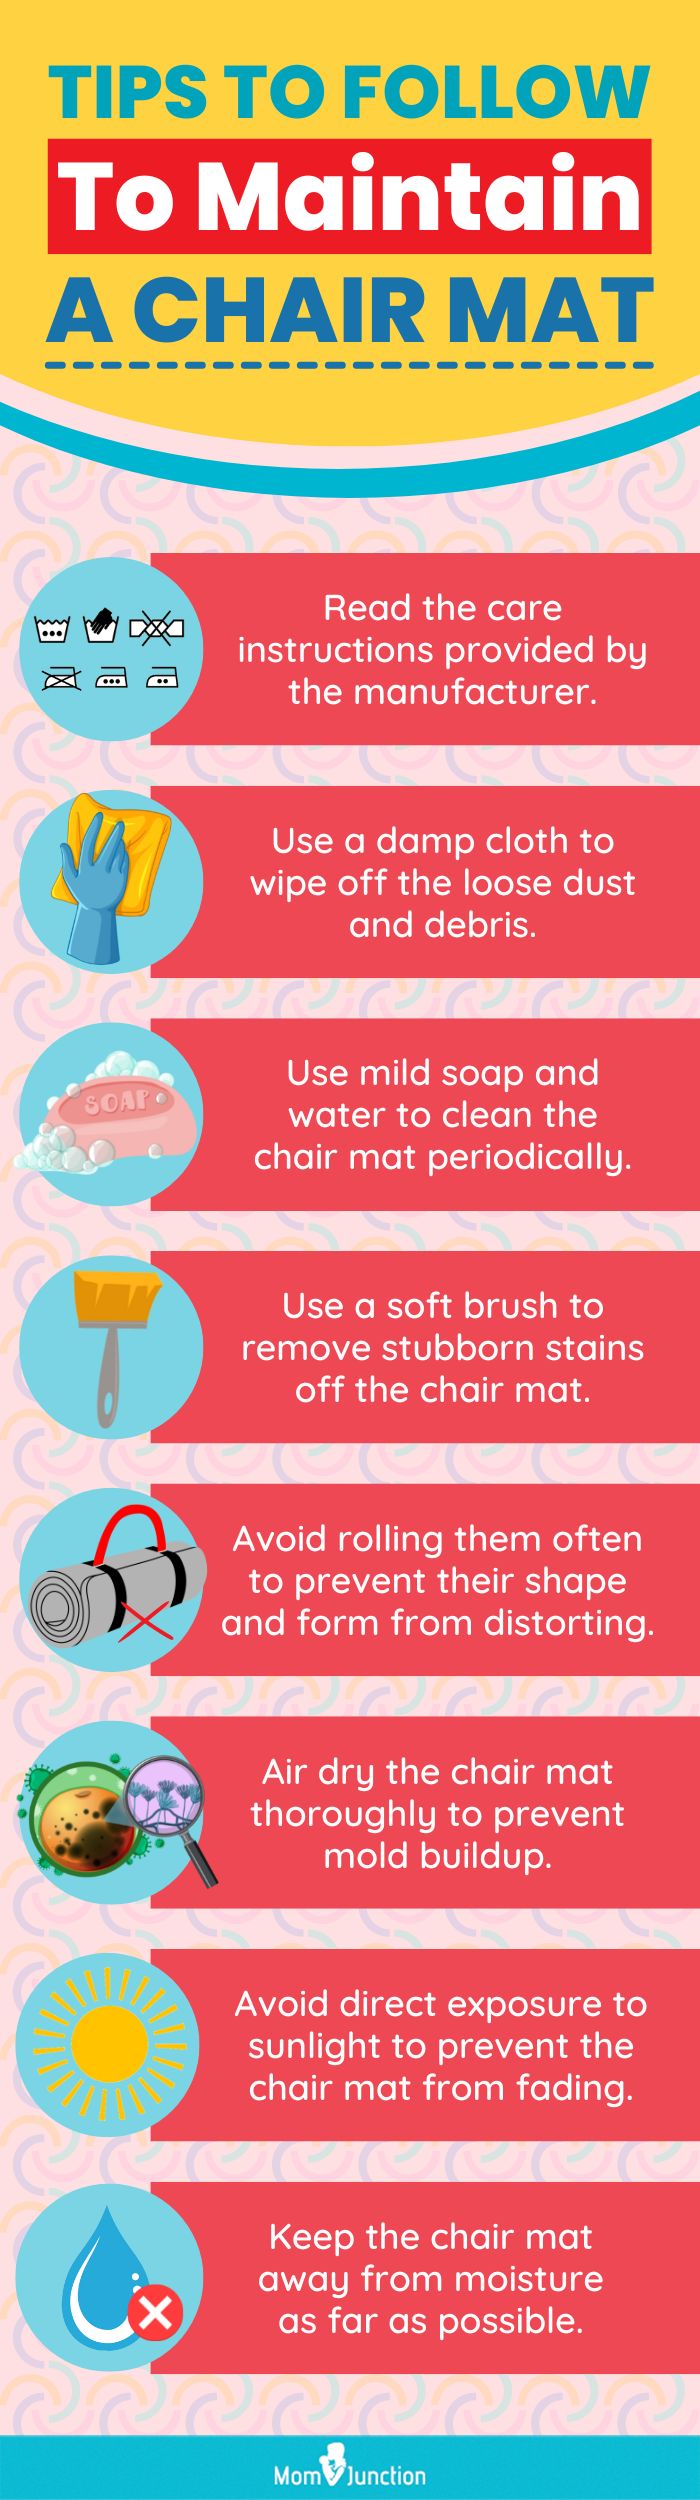 Tips To Follow To Maintain A Chair Mat (infographic)